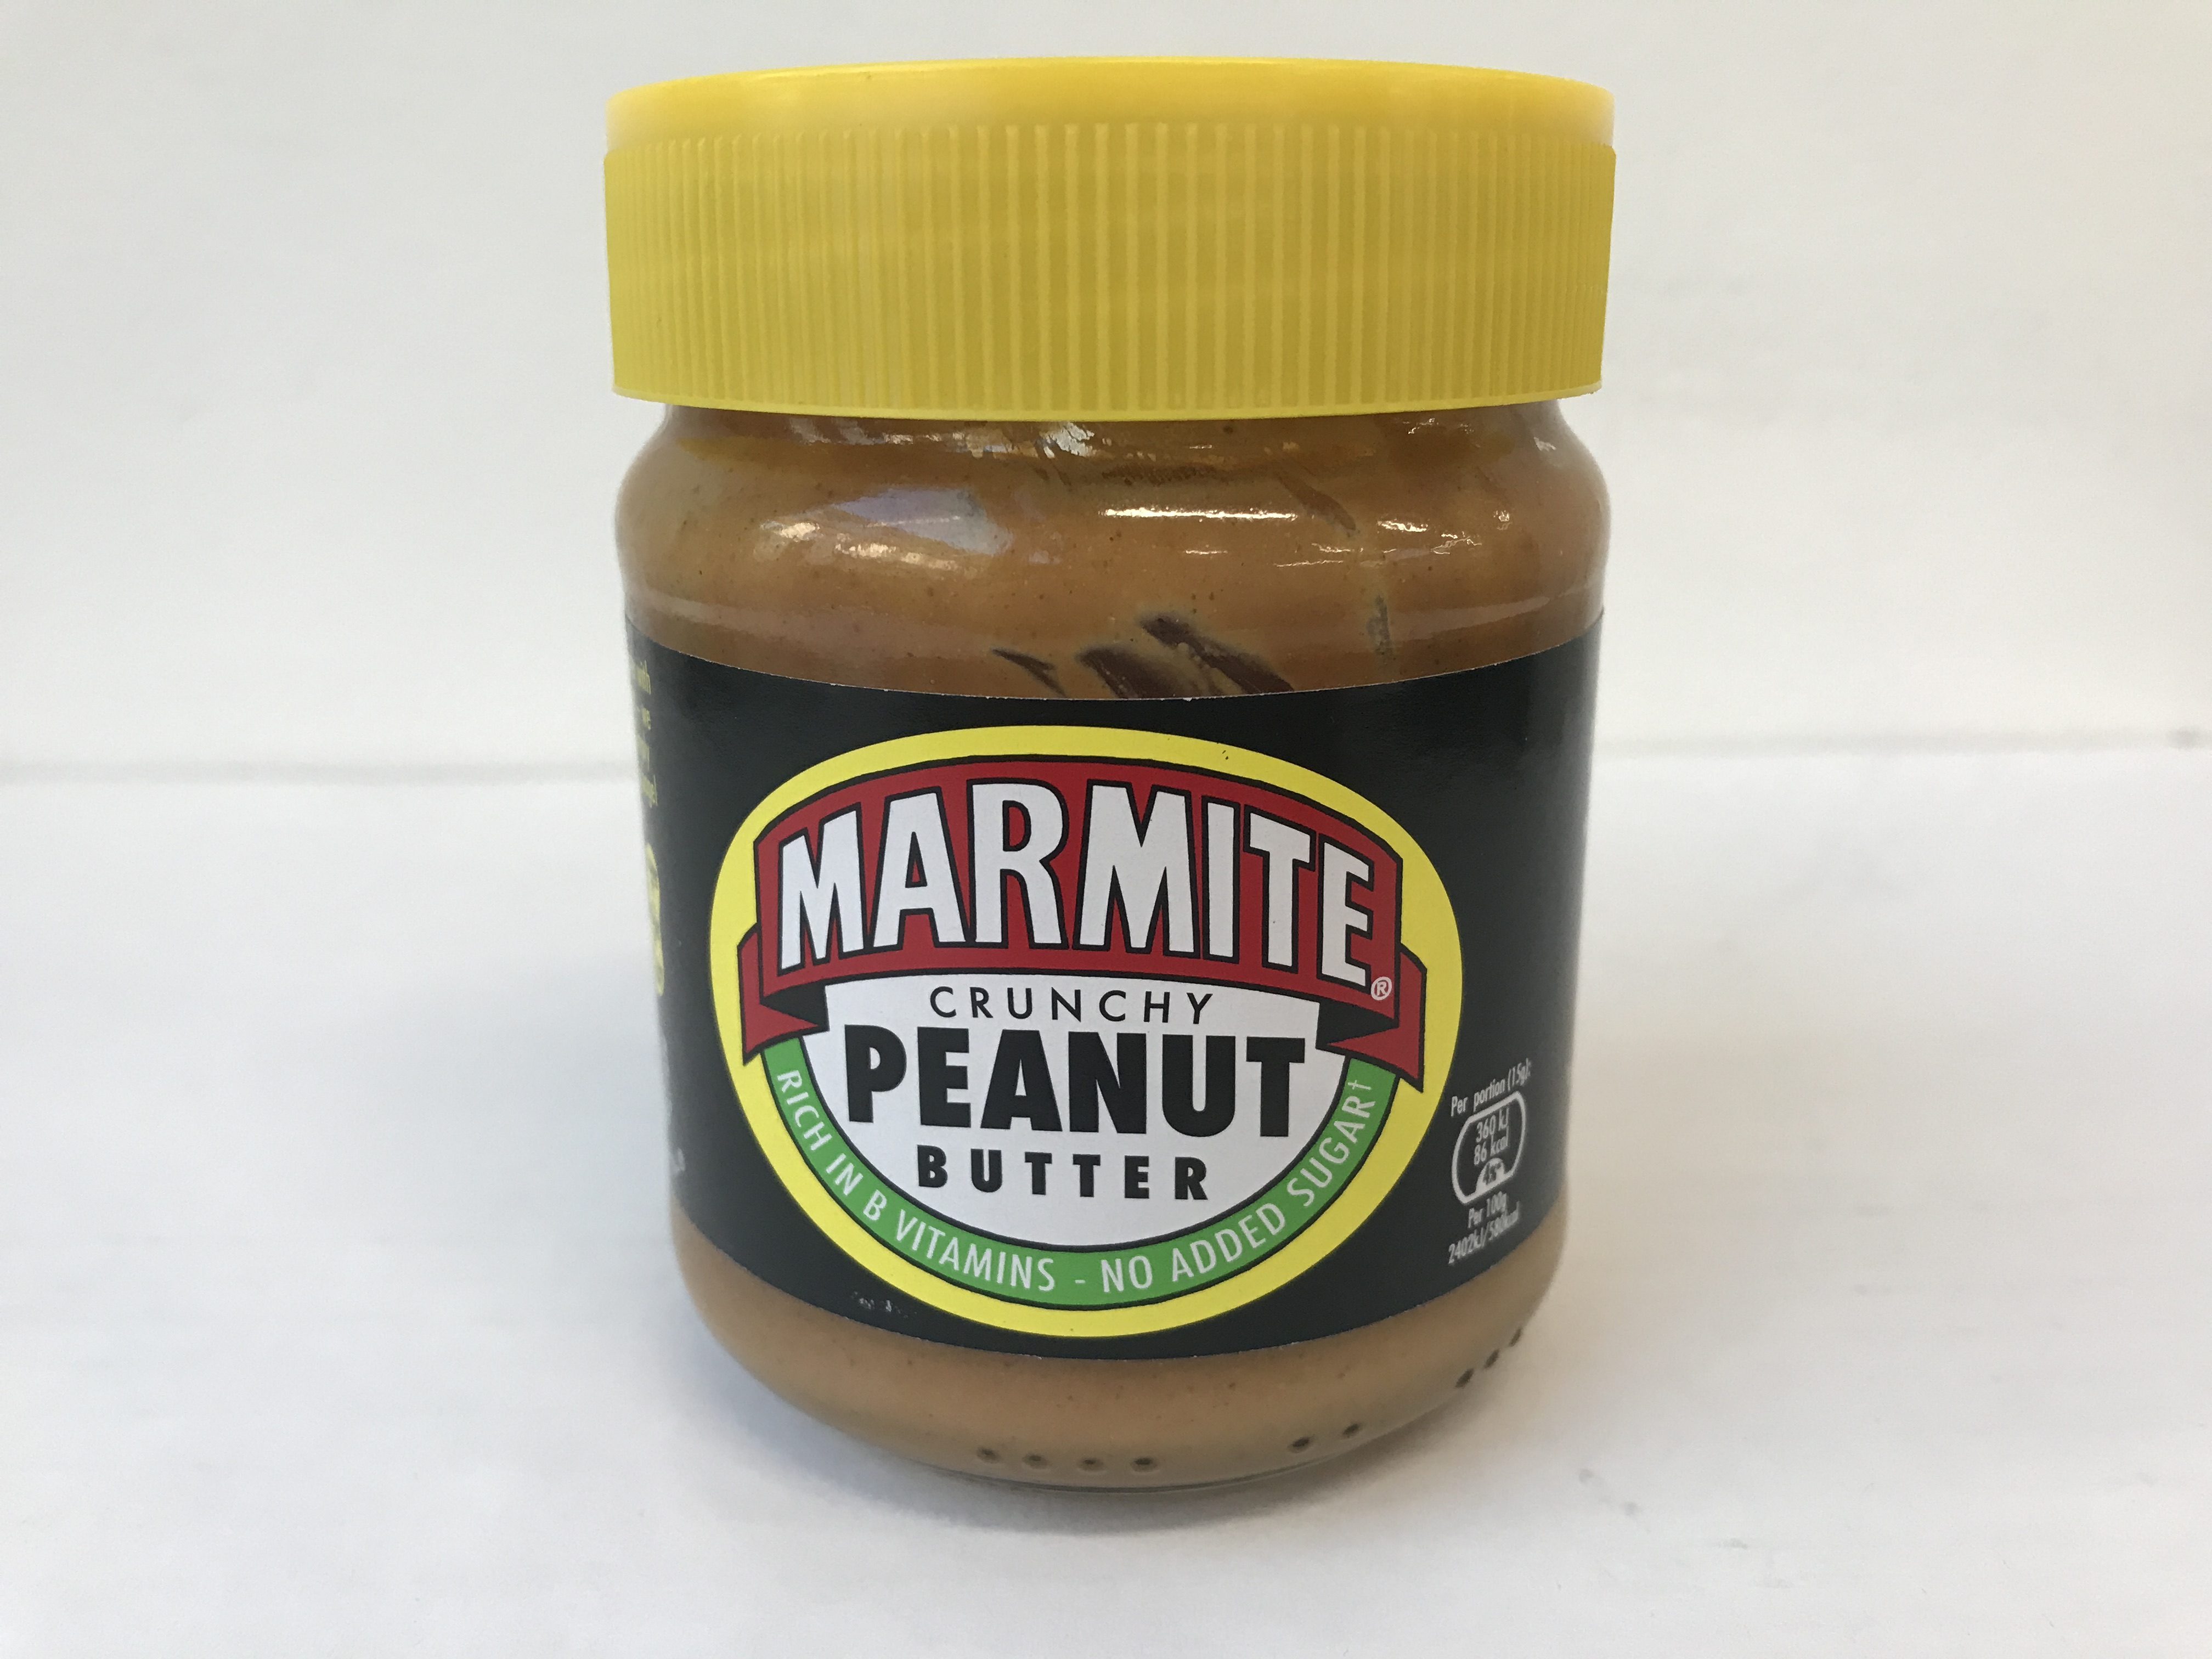 Marmite Peanut Butter is the Epitome of Brexit Britain’s Identity Crisis - MUNCHIES4032 x 3024